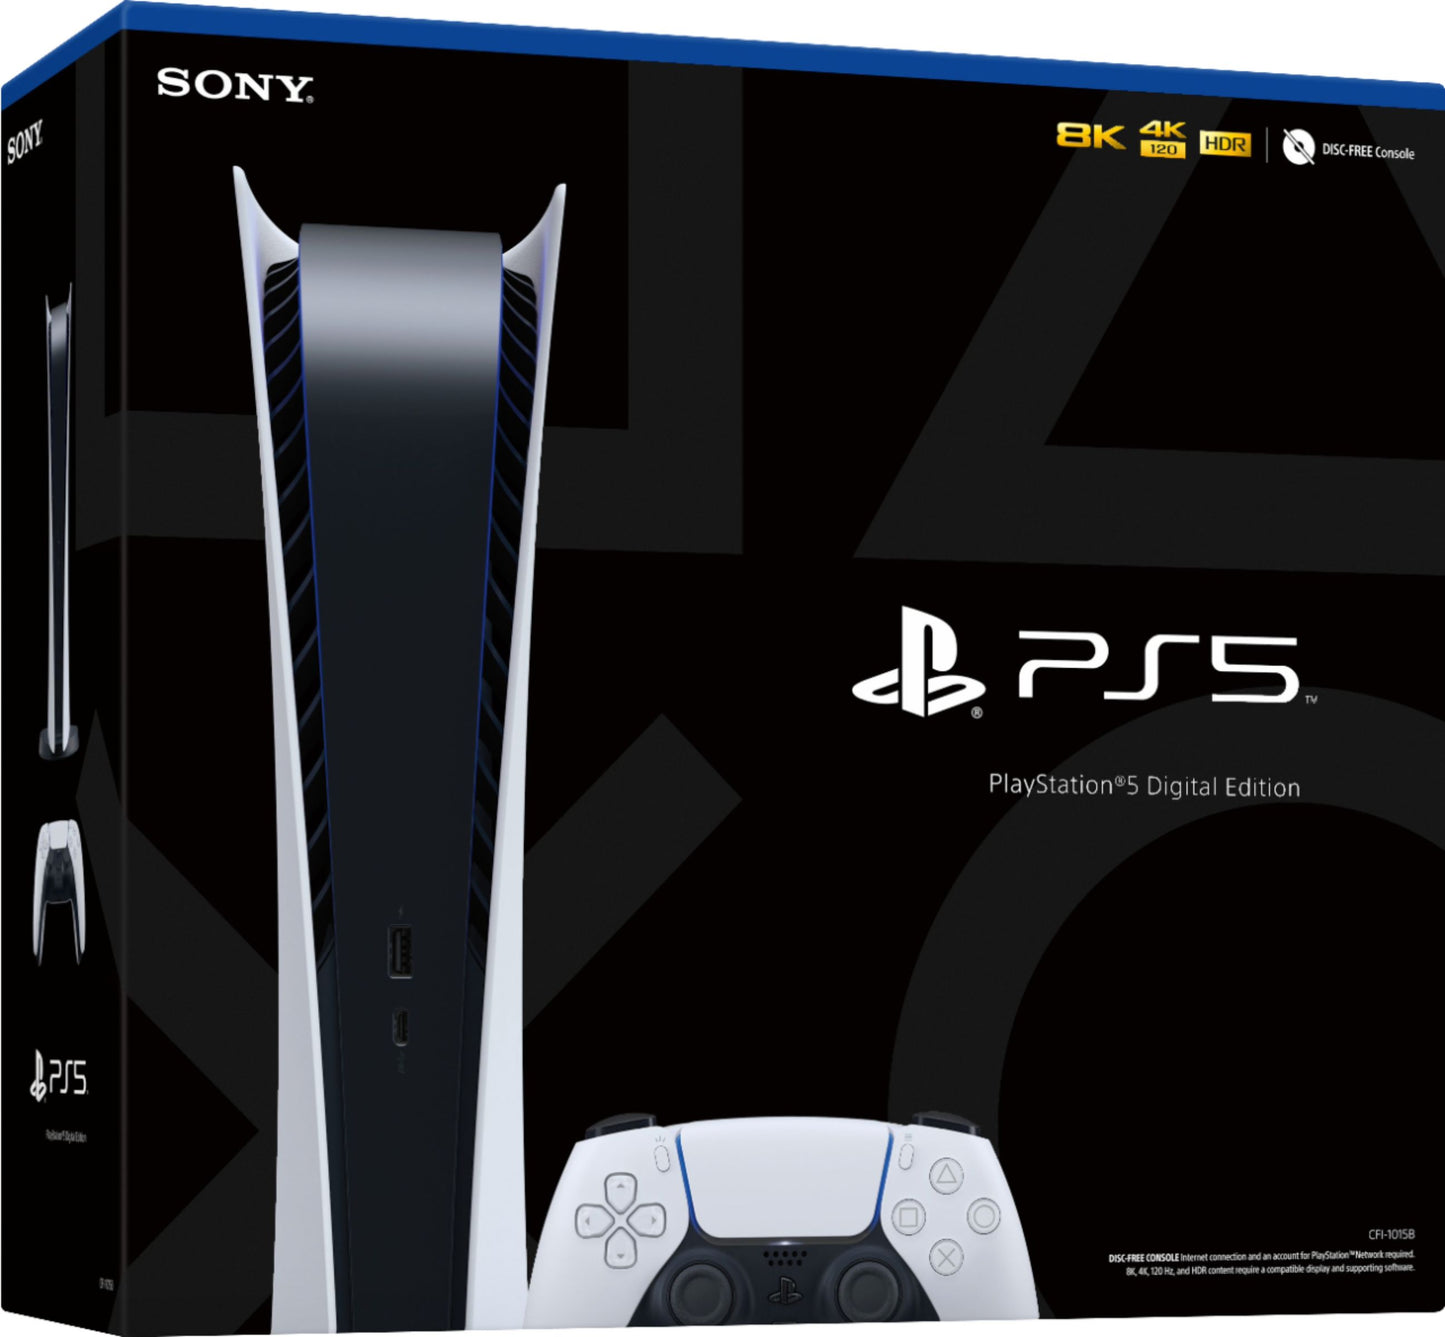 Kenyatronics - CHRISTMAS SALE! Enjoy best prices on Sony PS5 SLIM Gaming  Console and games only @ Kenyatronics.com. Explore uncharted virtual  territories and slay dragons with this sleek Sony PlayStation 5 gaming